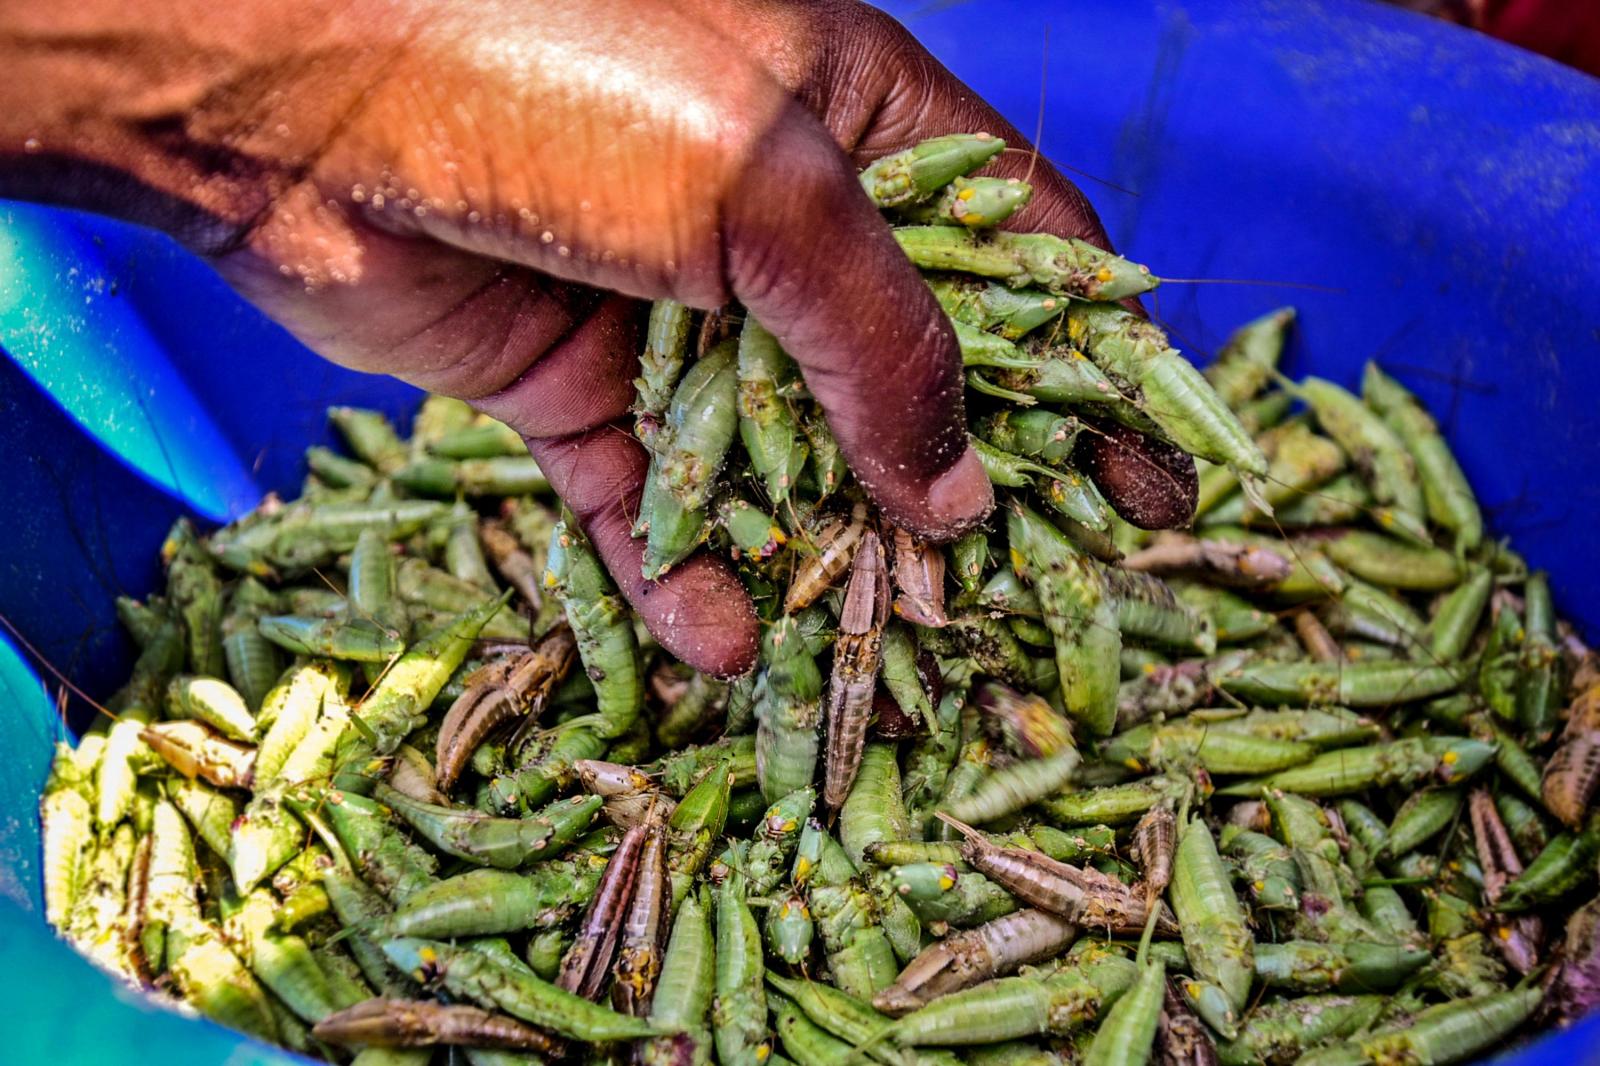 Plucked grasshoppers at one of the market stalls.